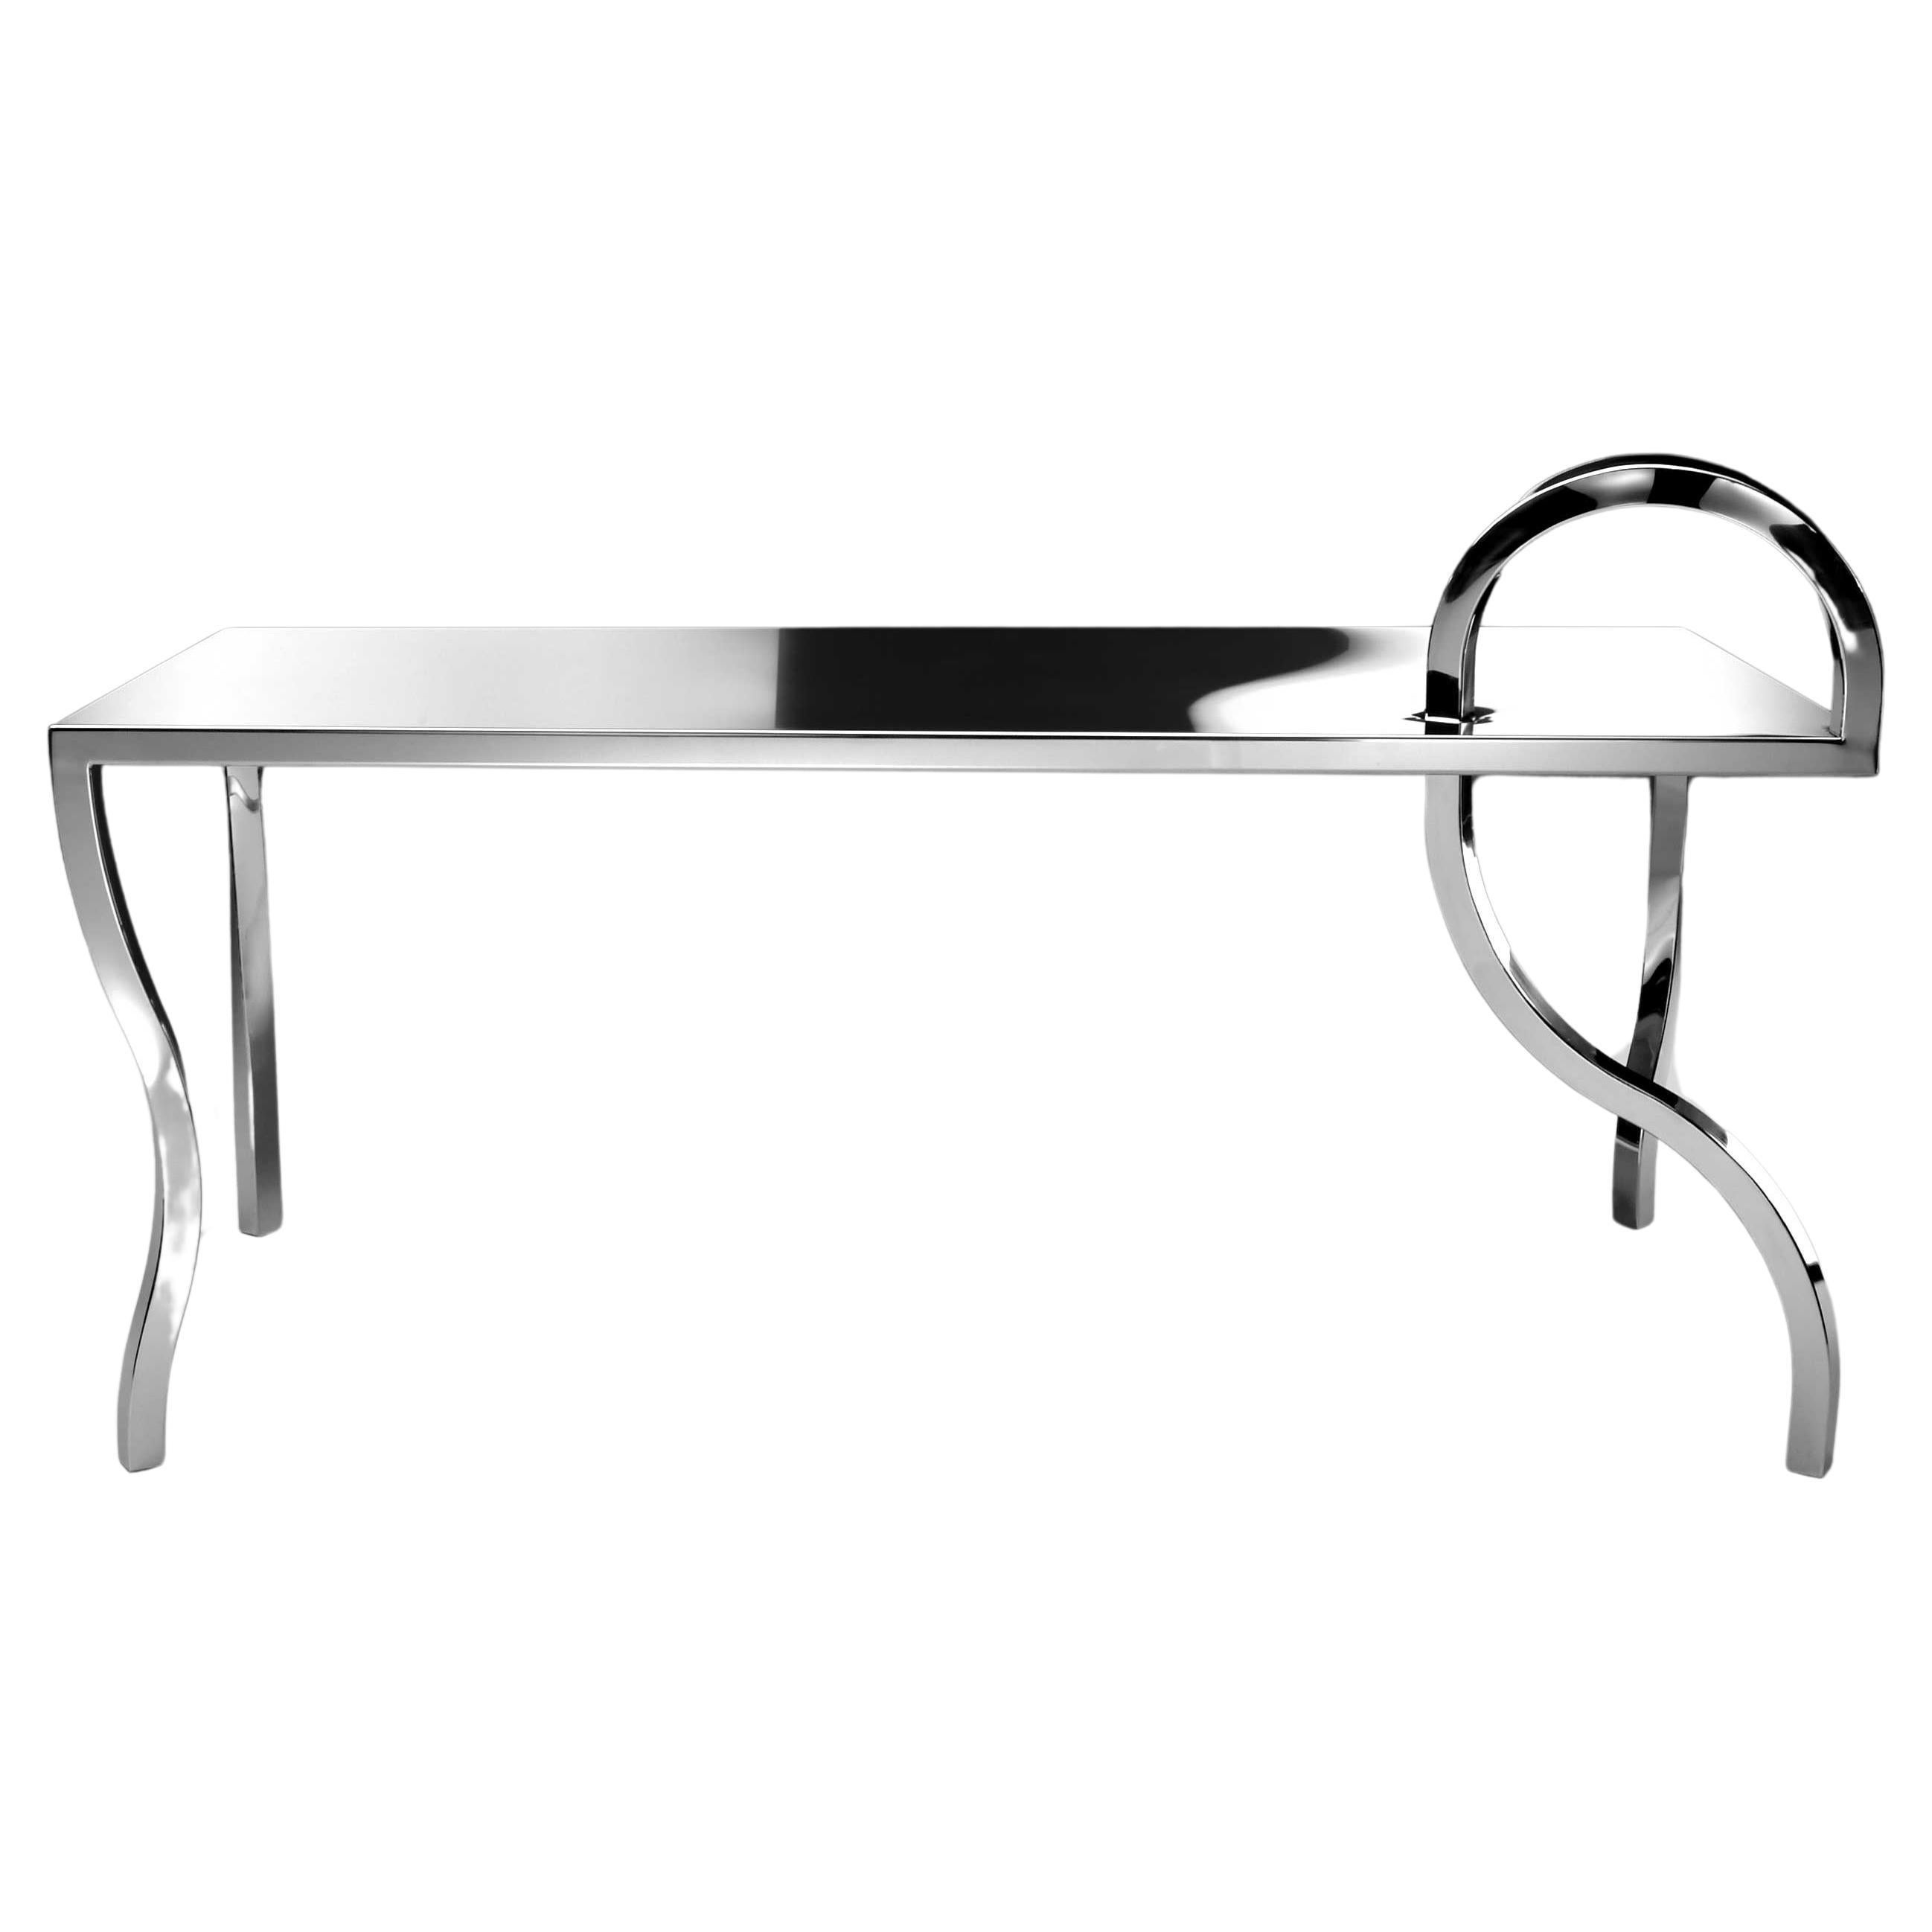 Table - Anomalie Collection designed by Gio Minelli